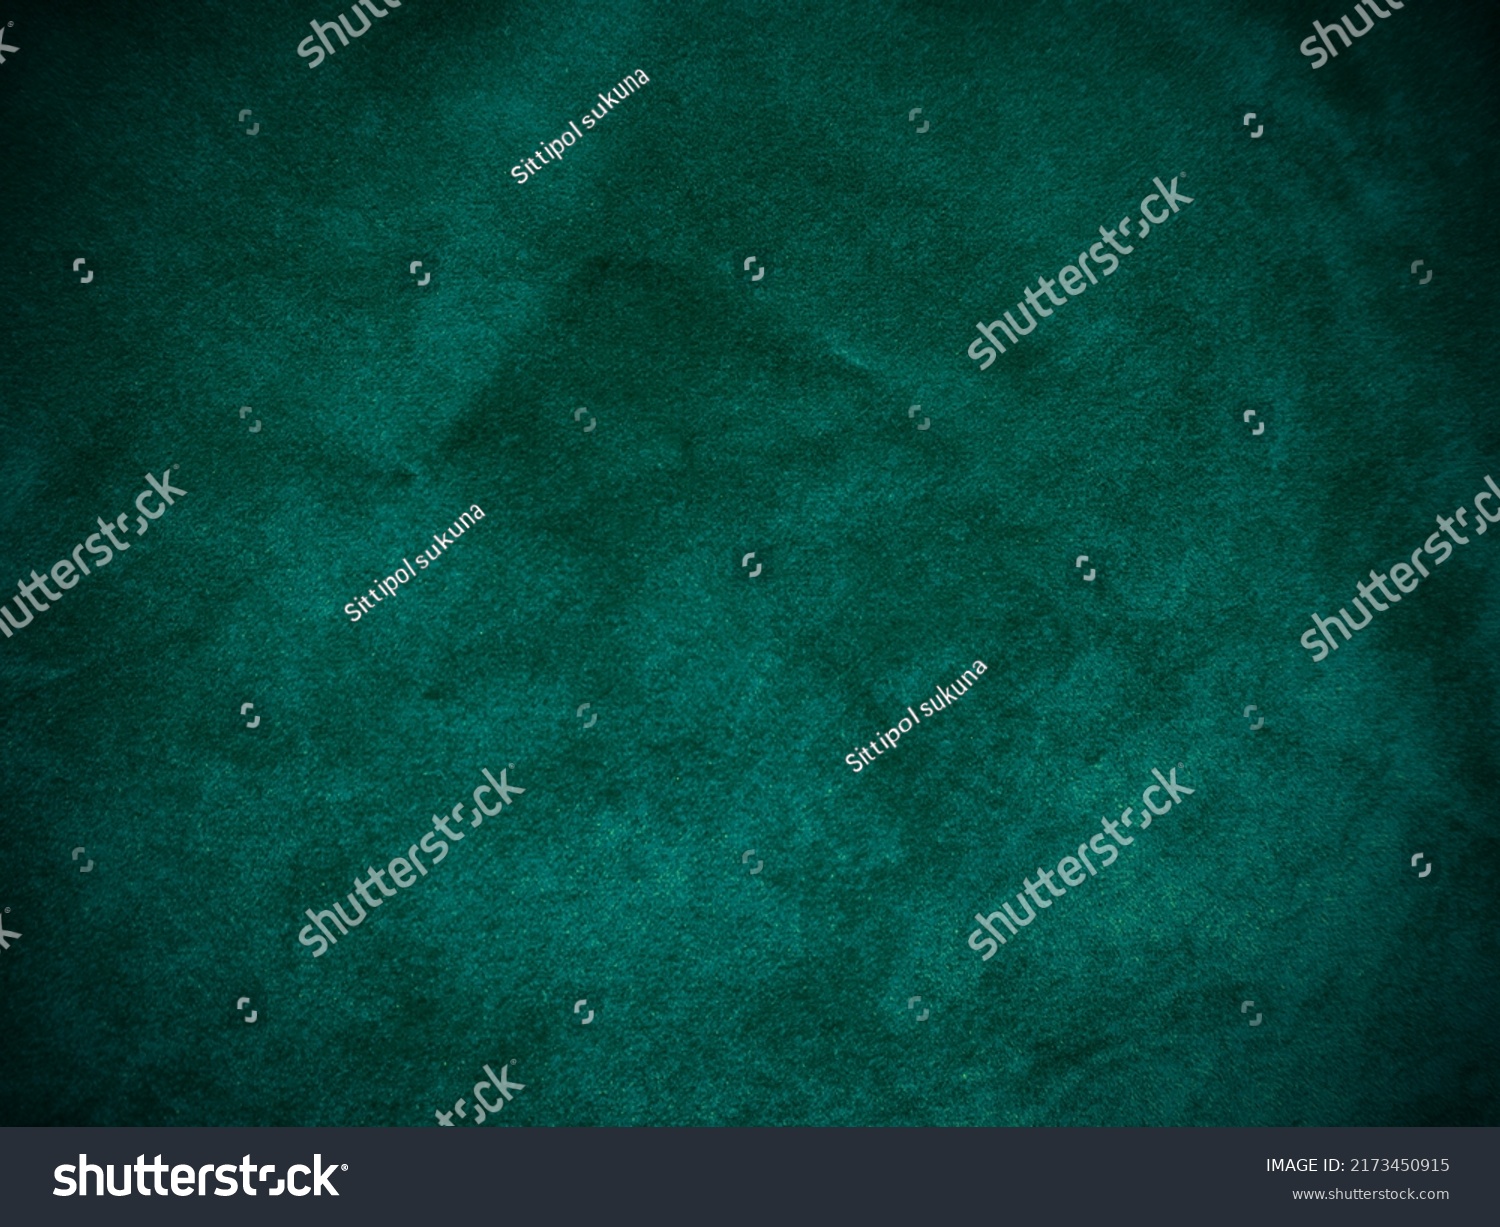 Dark green old velvet fabric texture used as background. Empty green fabric background of soft and smooth textile material. There is space for text.	 #2173450915